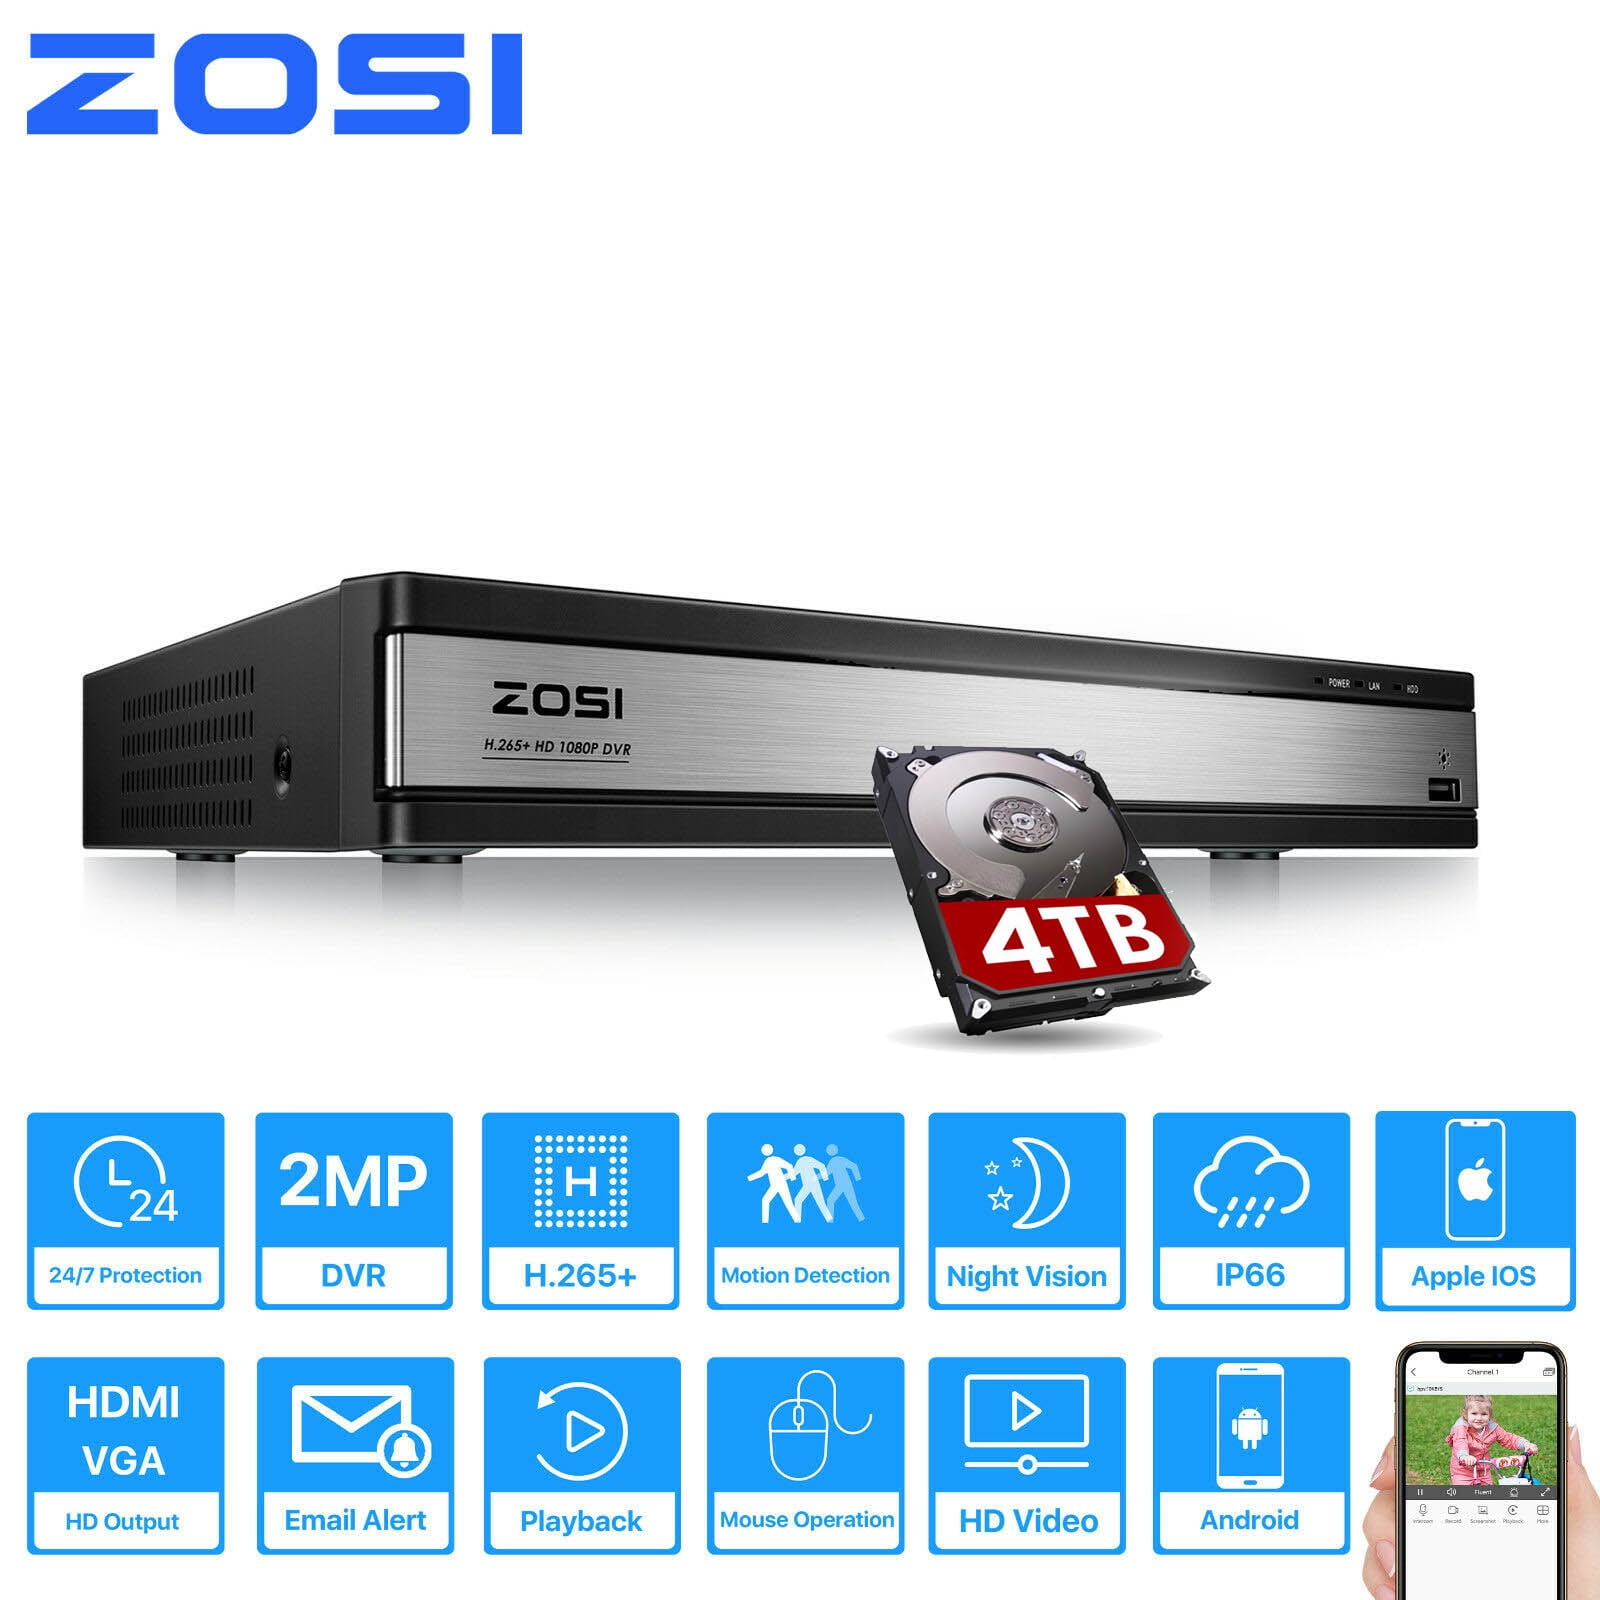 ZOSI H.265+ 1080P Lite 16 Channel DVR for Security Camera System Analog/AHD/TVI/CVI Hybrid 4-in-1 Surveillance CCTV DVR Recorder,Motion Detection,Remote Access,Email Alarm,2TB Hard Drive Built-in 